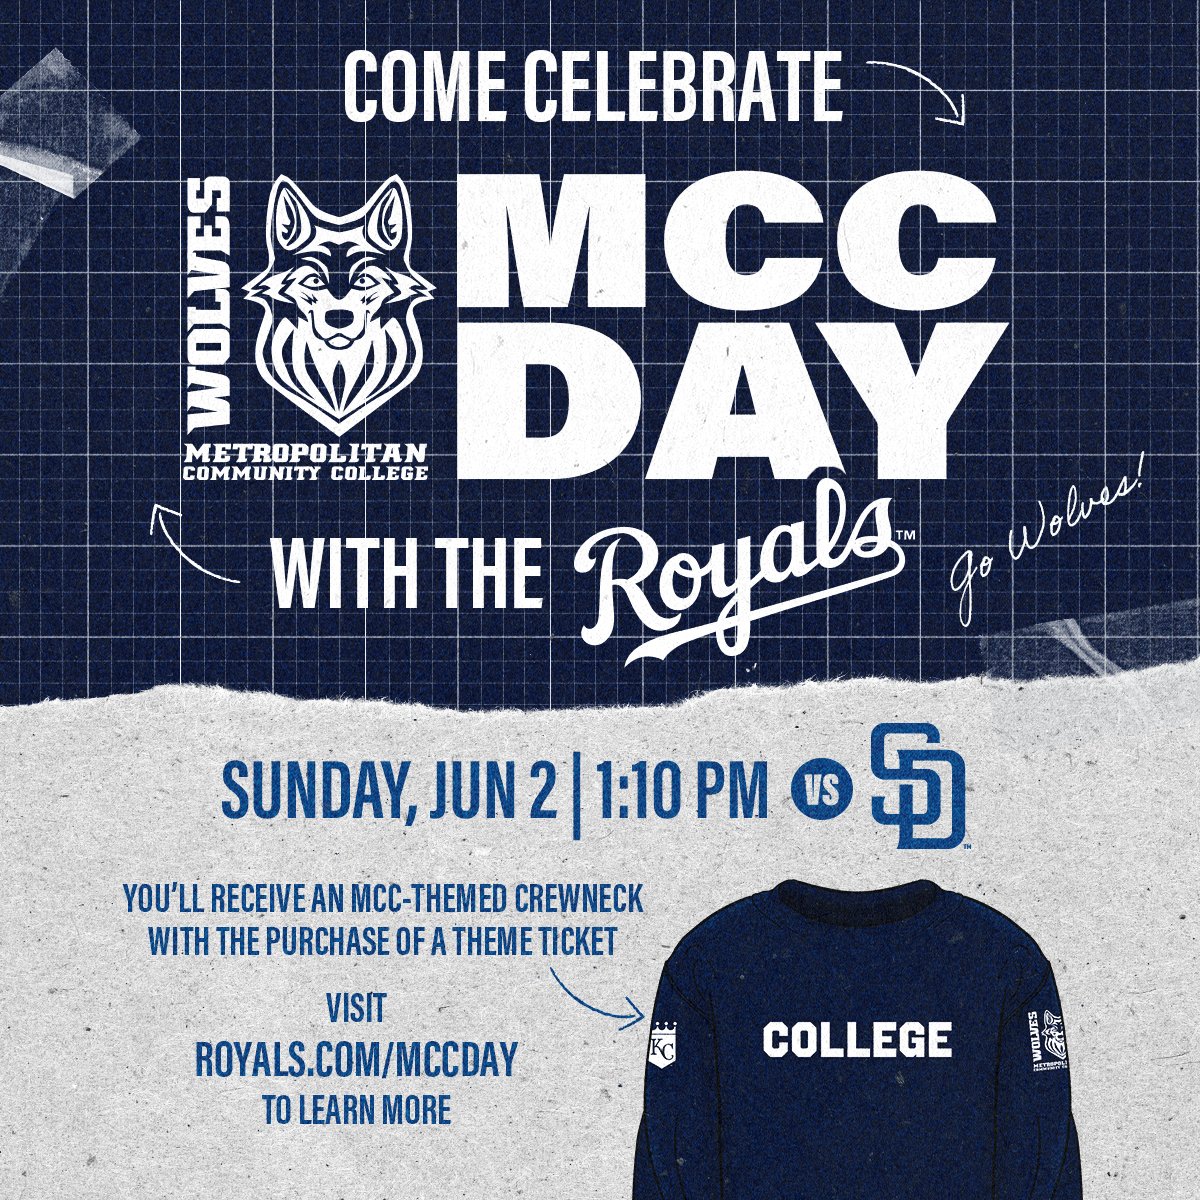 ⚾💙 Celebrate Your MCC Pride! ⚾💙 Each promotional ticket purchased includes an MCC/KC @Royals crewneck. Bonus! A percentage of the dollars from each MCC Day promotional ticket sold supports student scholarships through the MCC Foundation. Visit: royals.com/MCCDAY